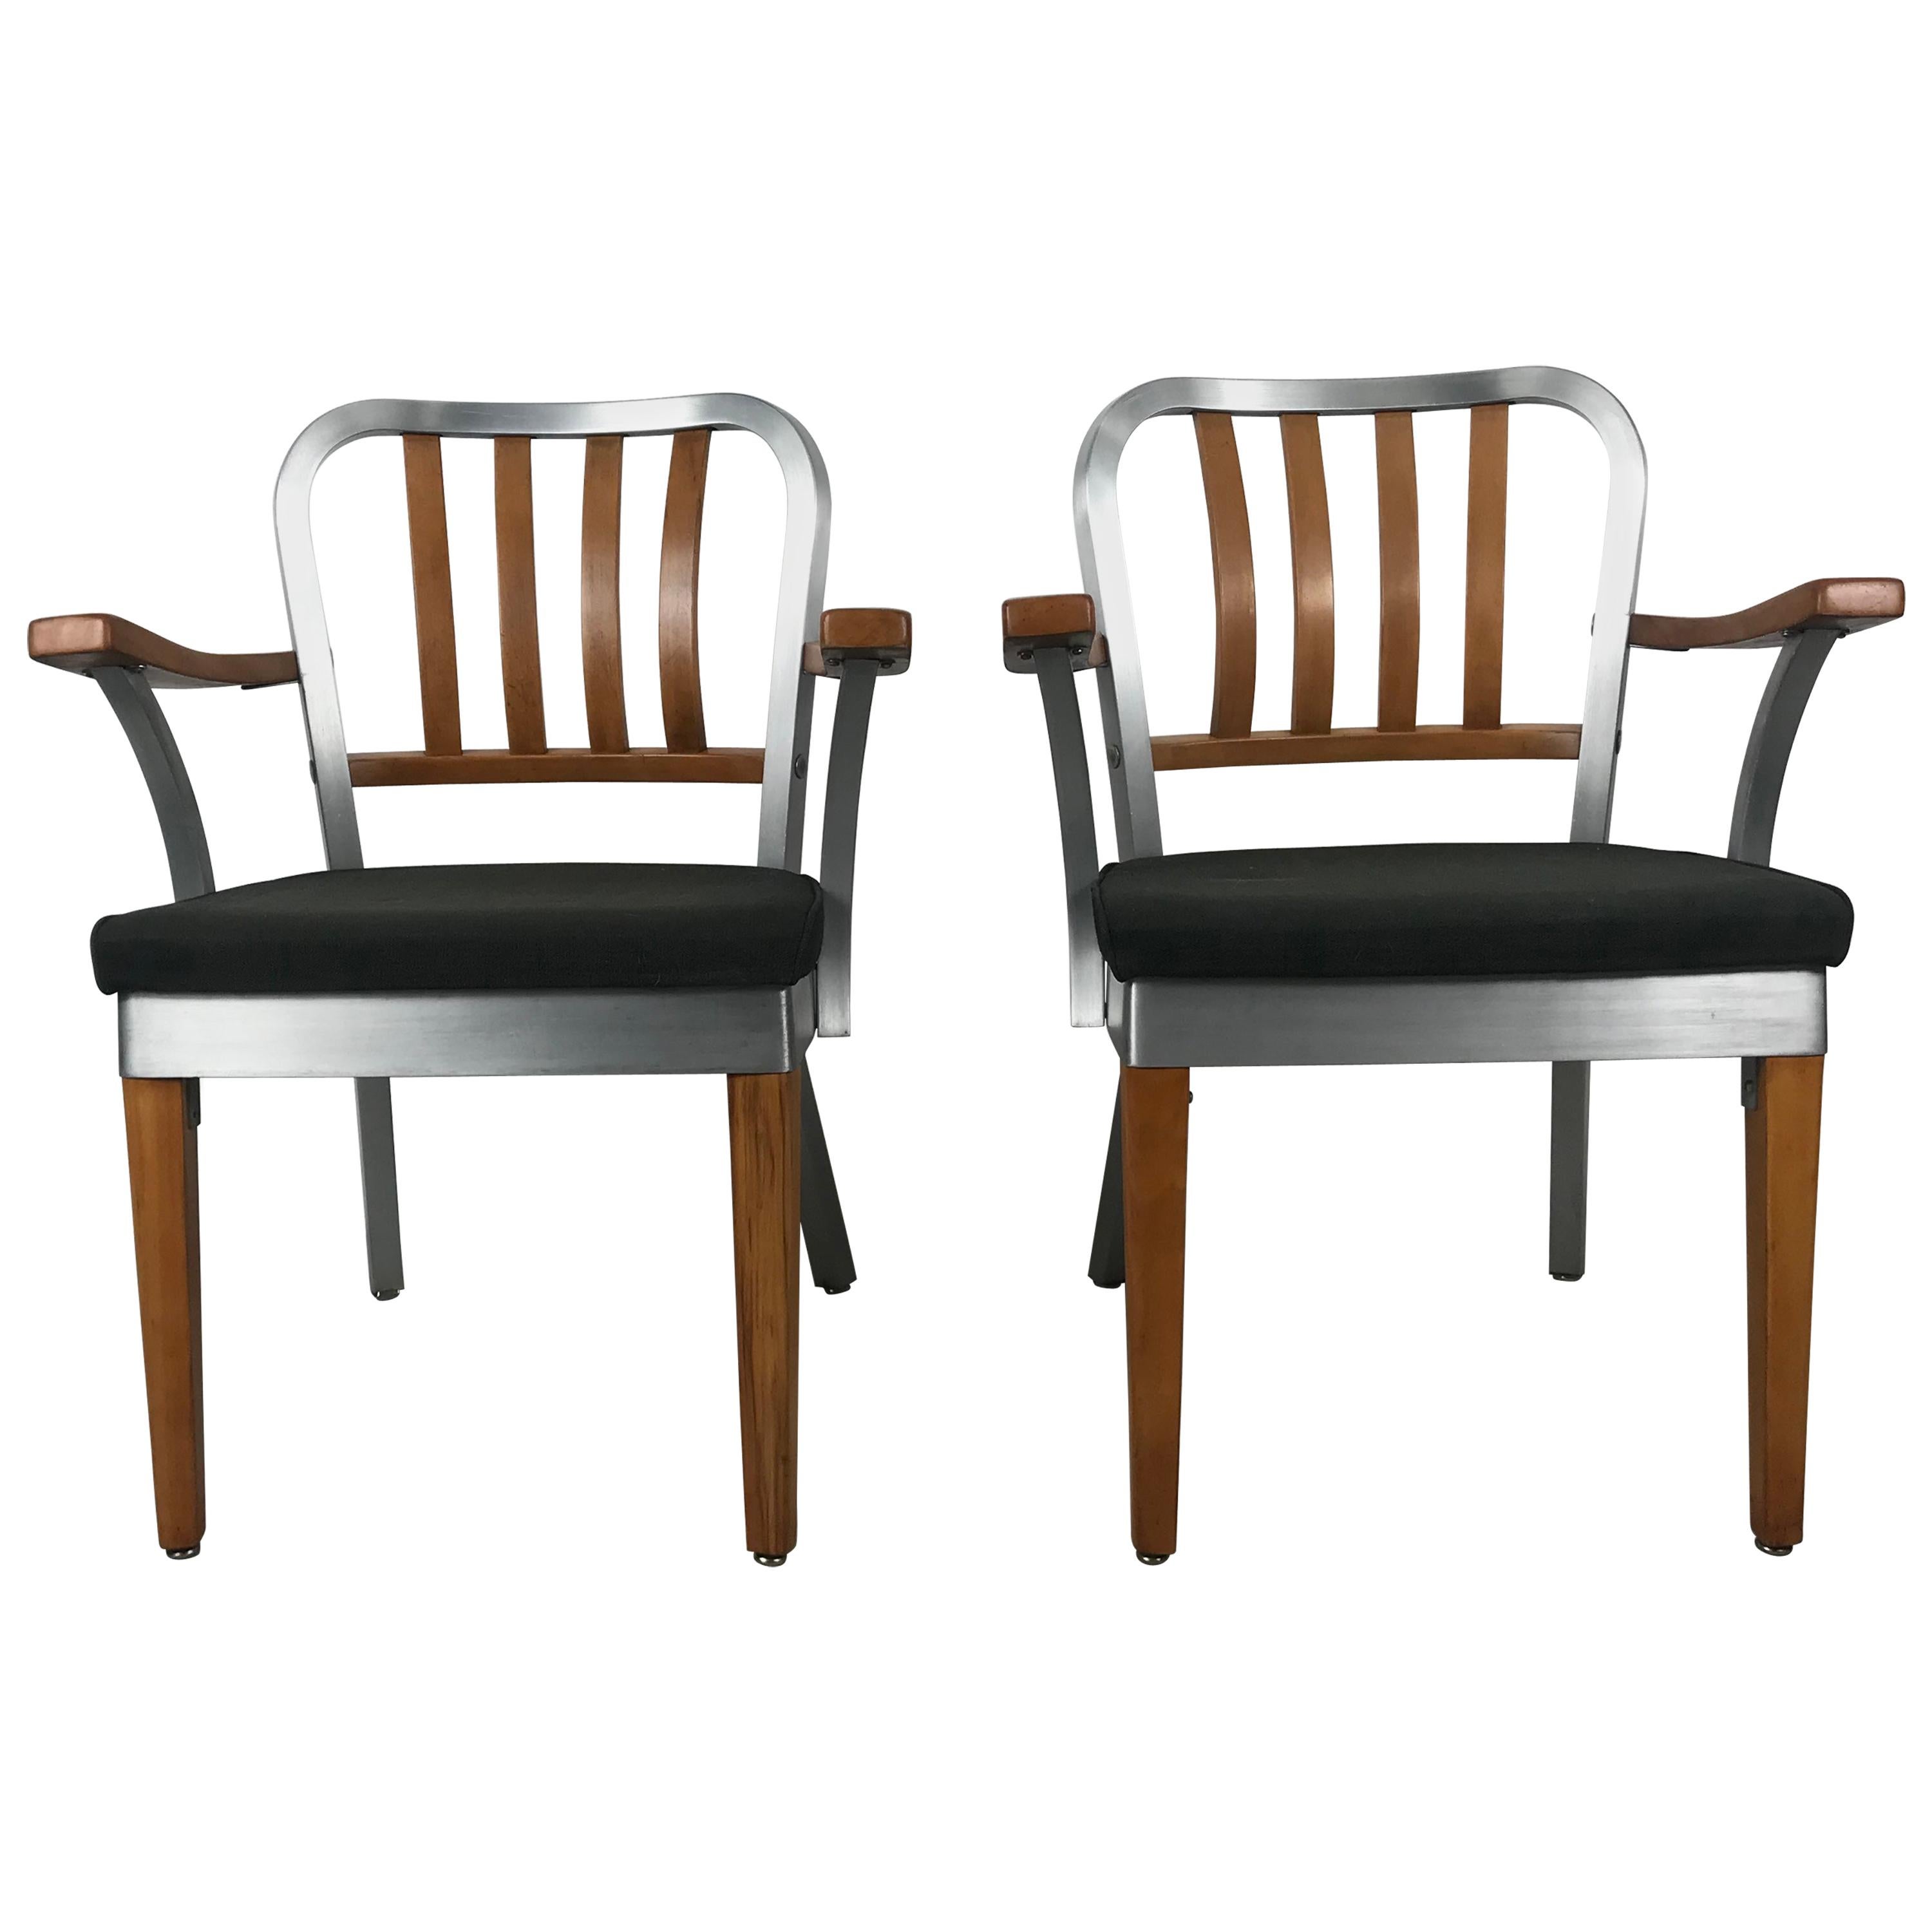 Pair of Classic Aluminum and Maple Armchairs by Shaw Walker 1940s Industrial